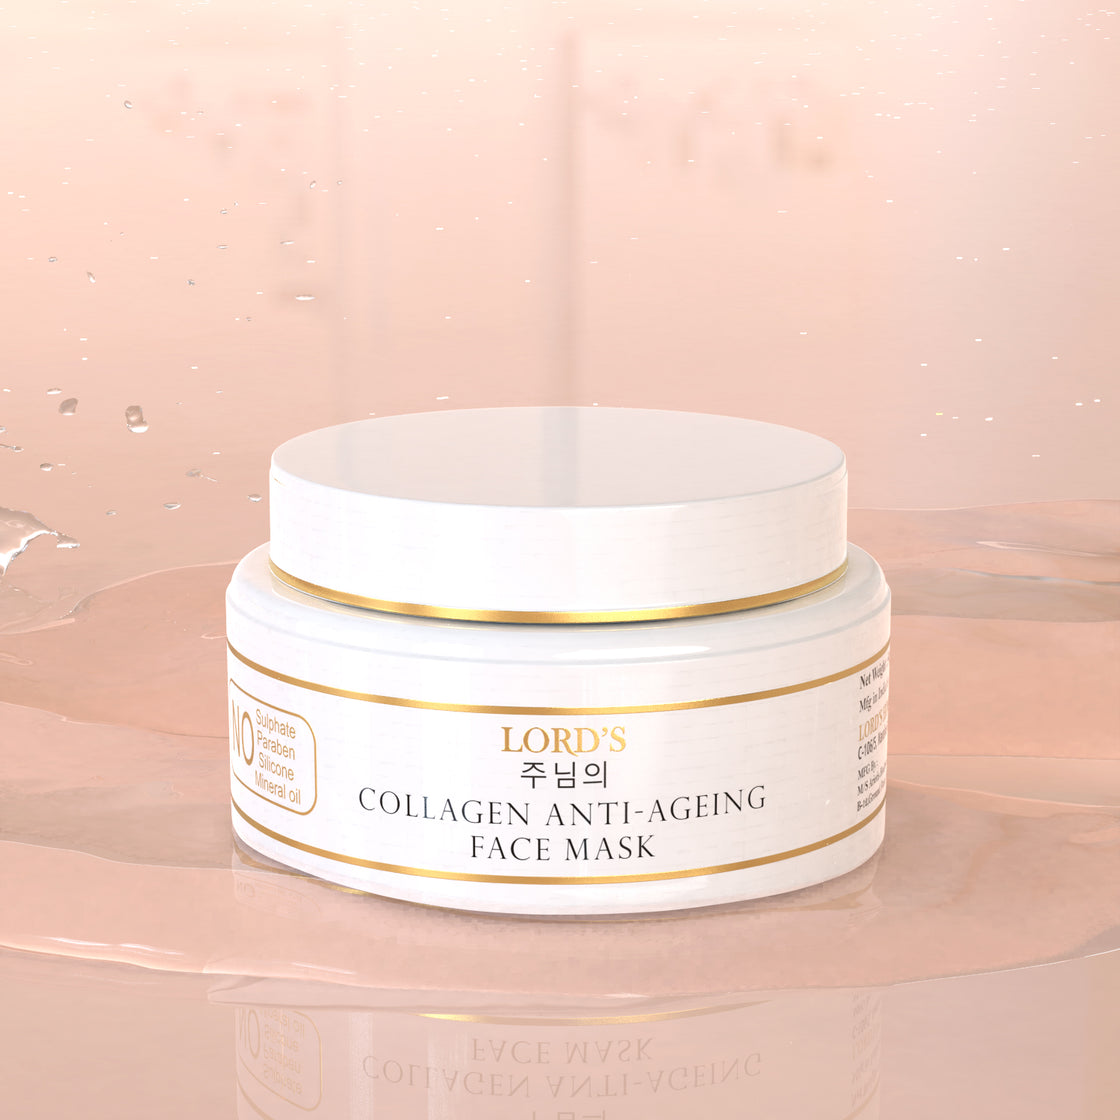 Lord's Collagen Anti-Ageing Face Mask (50g)